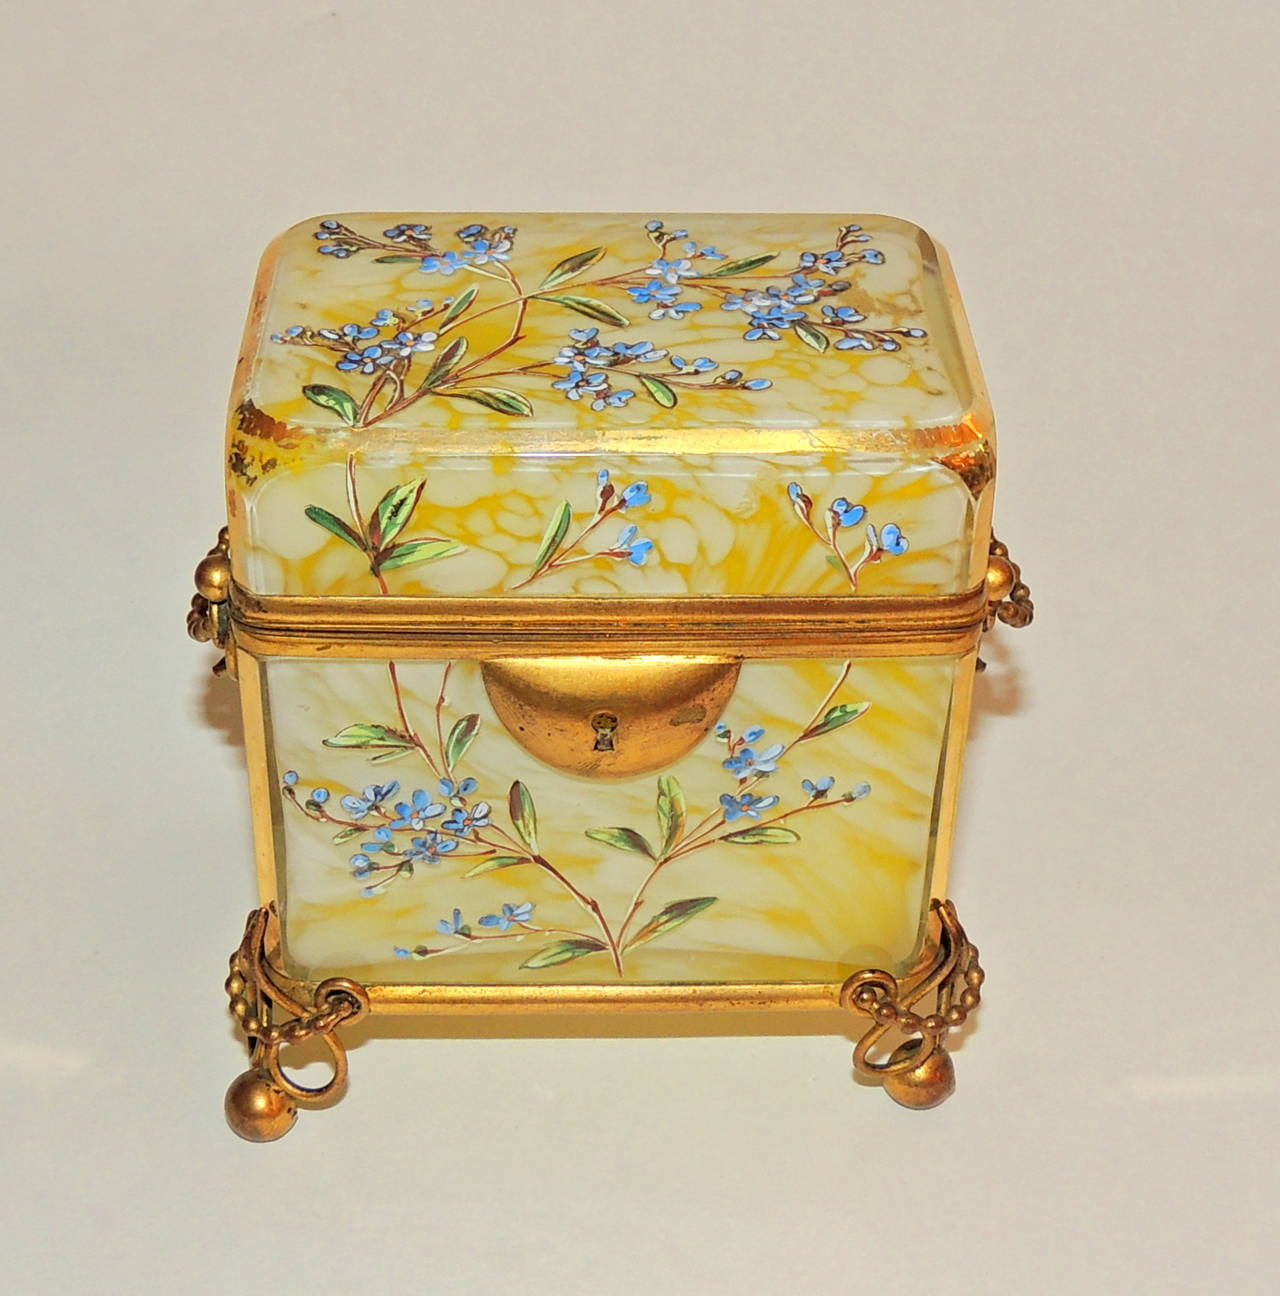 A wonderful and unusual marbleized yellow and white crystal casket with delicate hand painted enamel floral designs in blues and greens.  Beautiful and intricate scroll ormolu mountings decorate the balled feet and pretty handles of the casket.  The